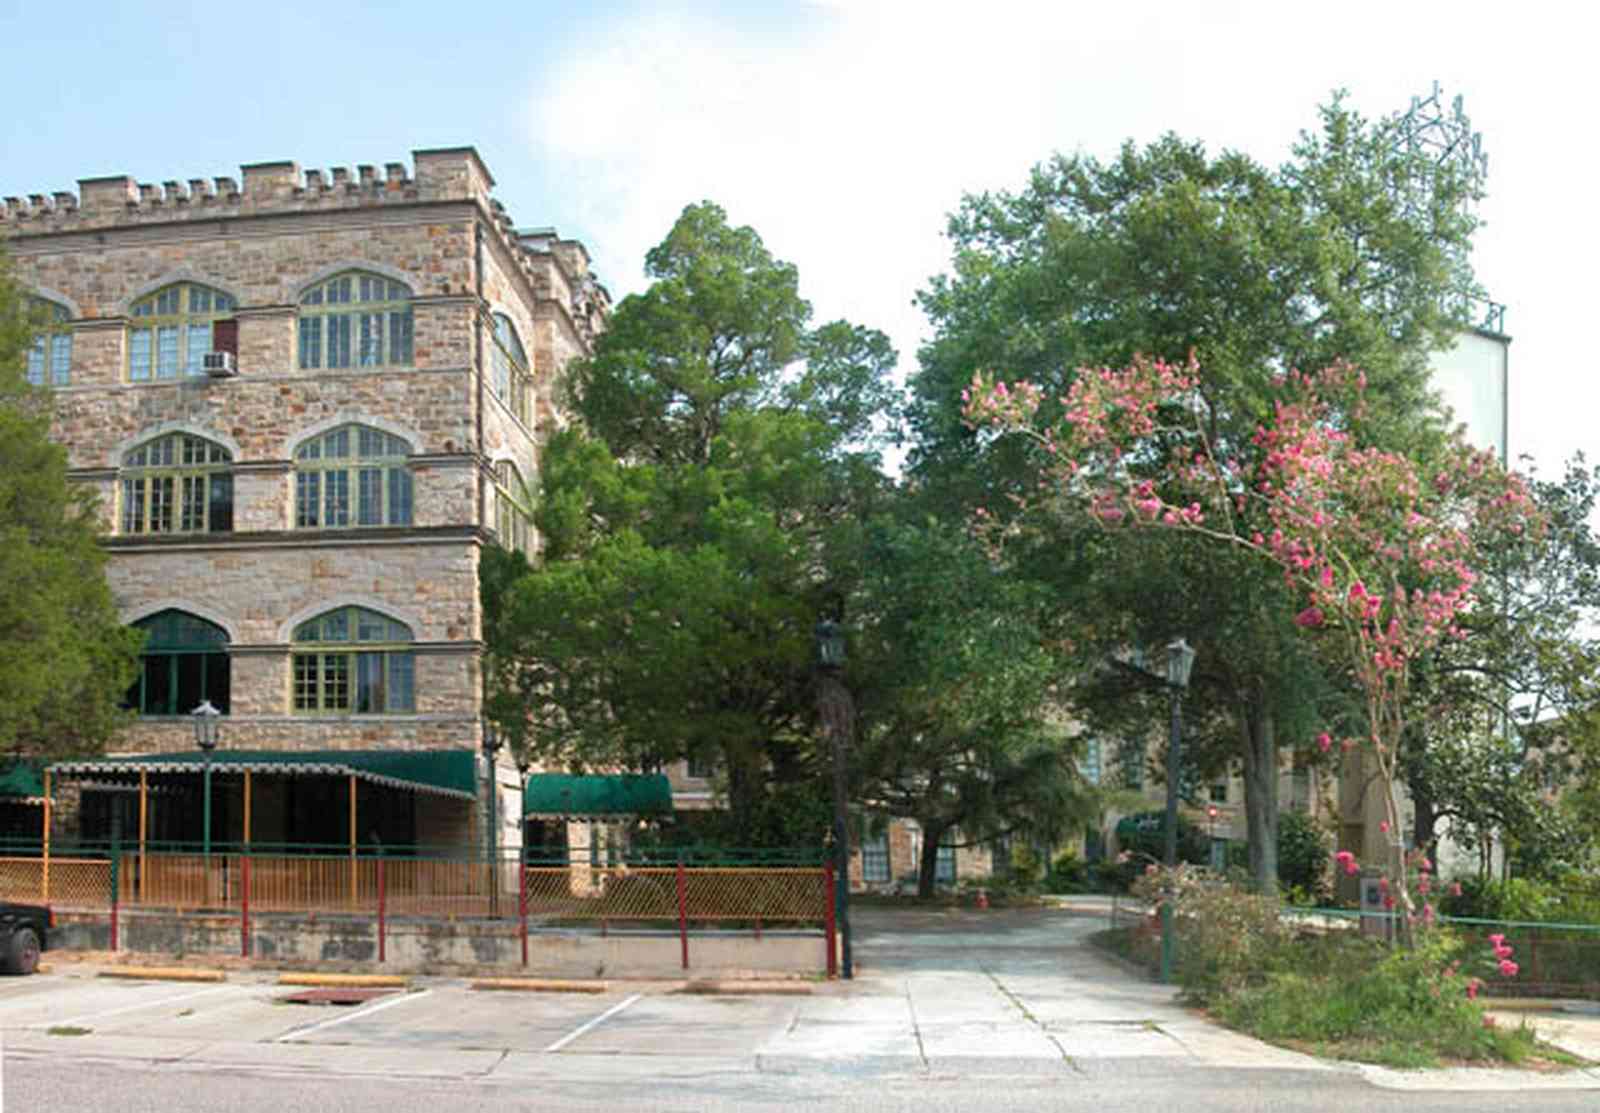 East-Hill:-Tower-East:-Old-Sacred-Heart-Hospital_20.jpg:  crepe myrtle tree, awning, wrought iron fence, pation fir tree, stone facade, battlement, stone courses